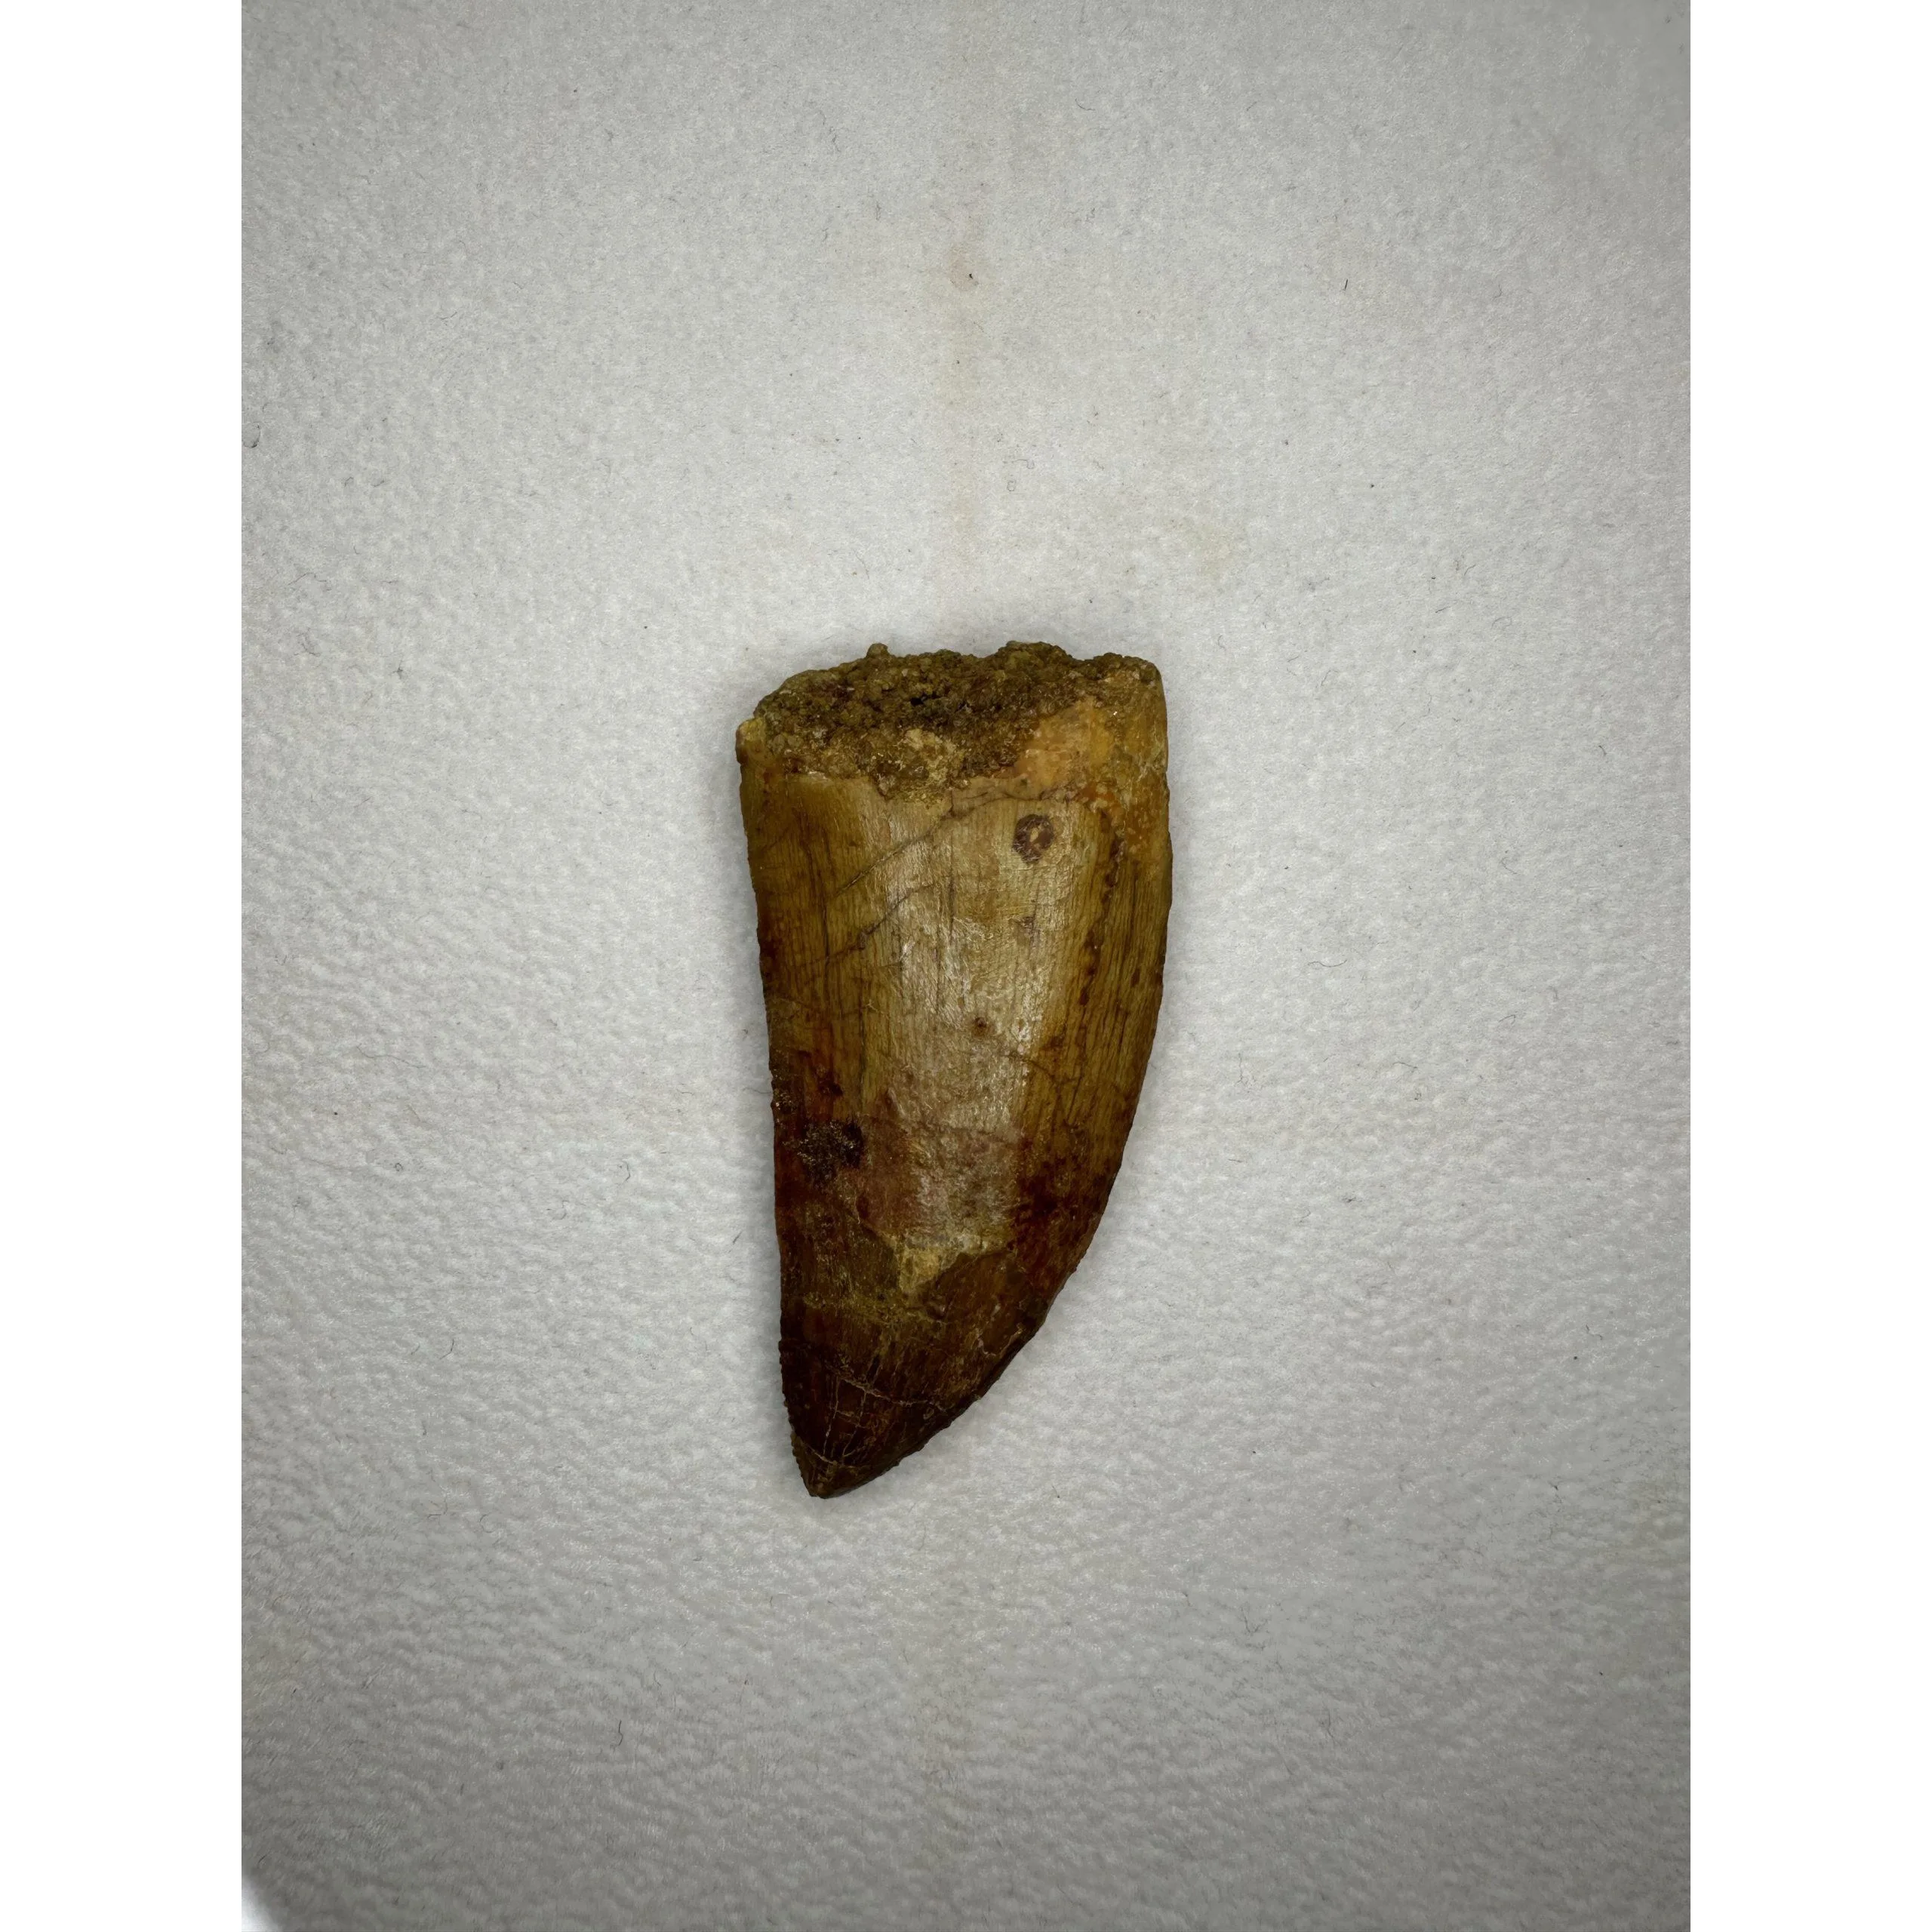 Carcharodontosaurus tooth, Morocco, natural 2 1/4 inch Prehistoric Online